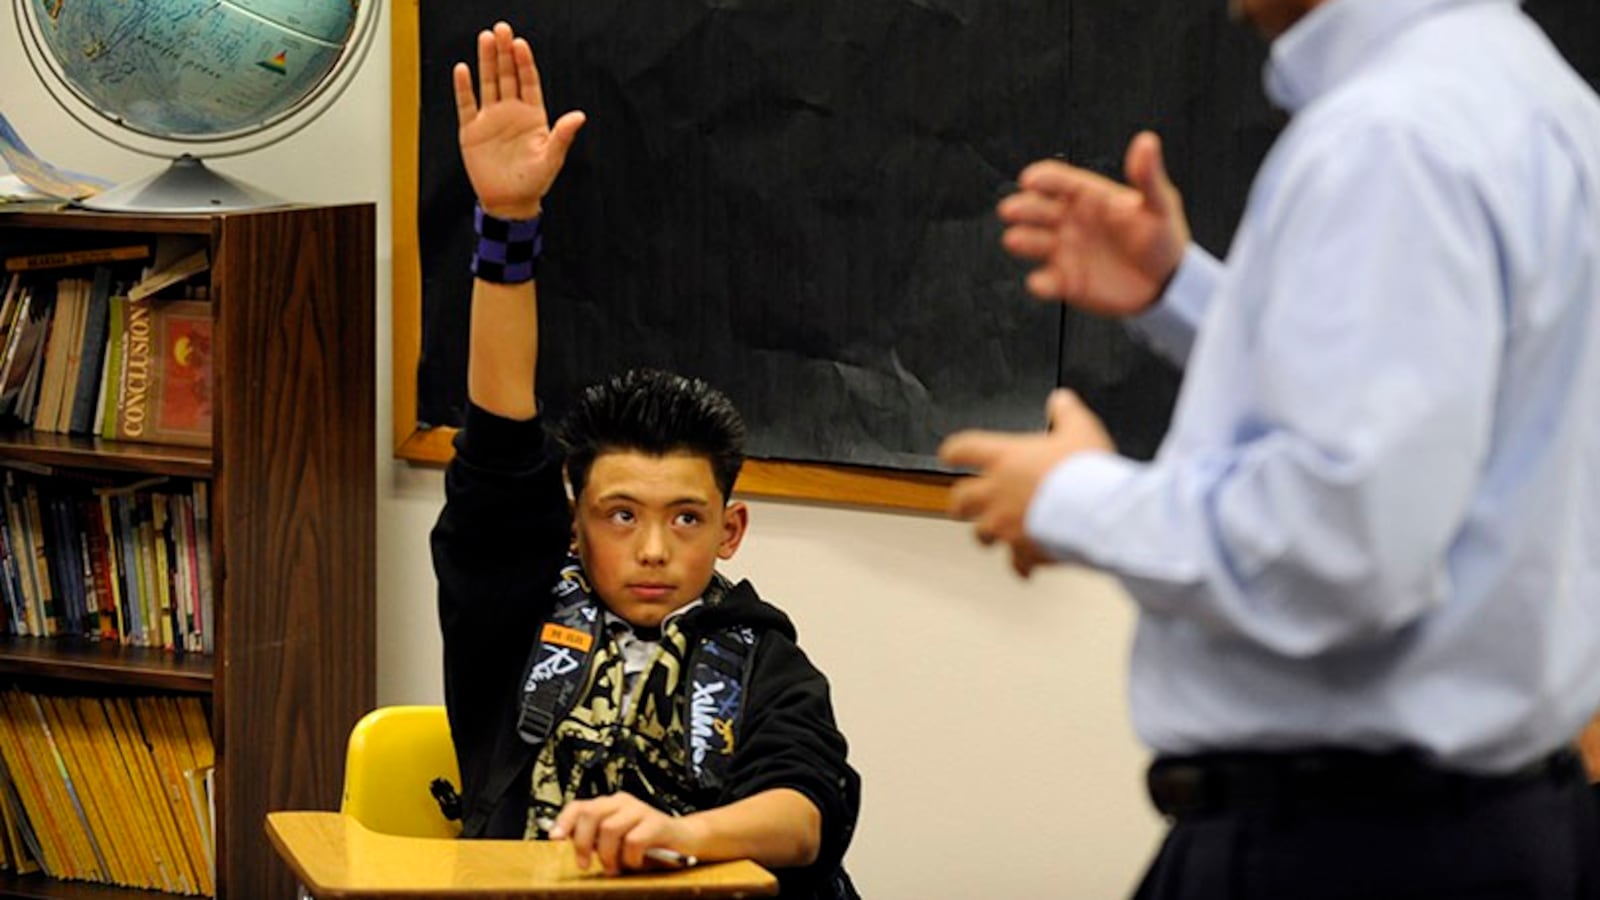 Jorge Robles, 12, raises his hand at Dr. Martin Luther King Jr. Early College in 2010.